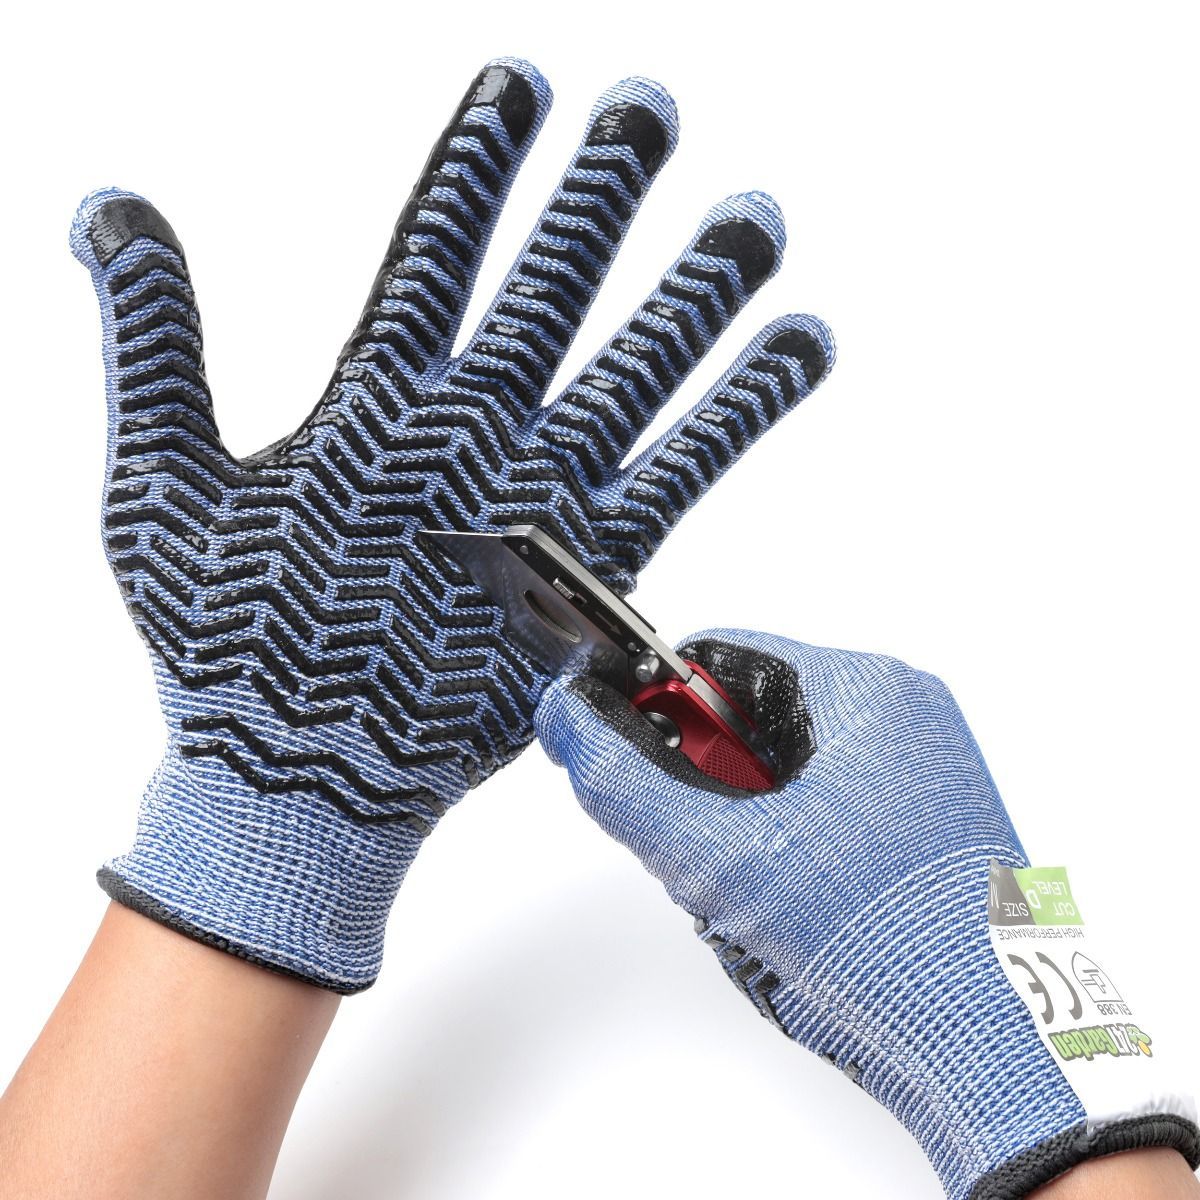 Cut resistant gloves level: All you need to know